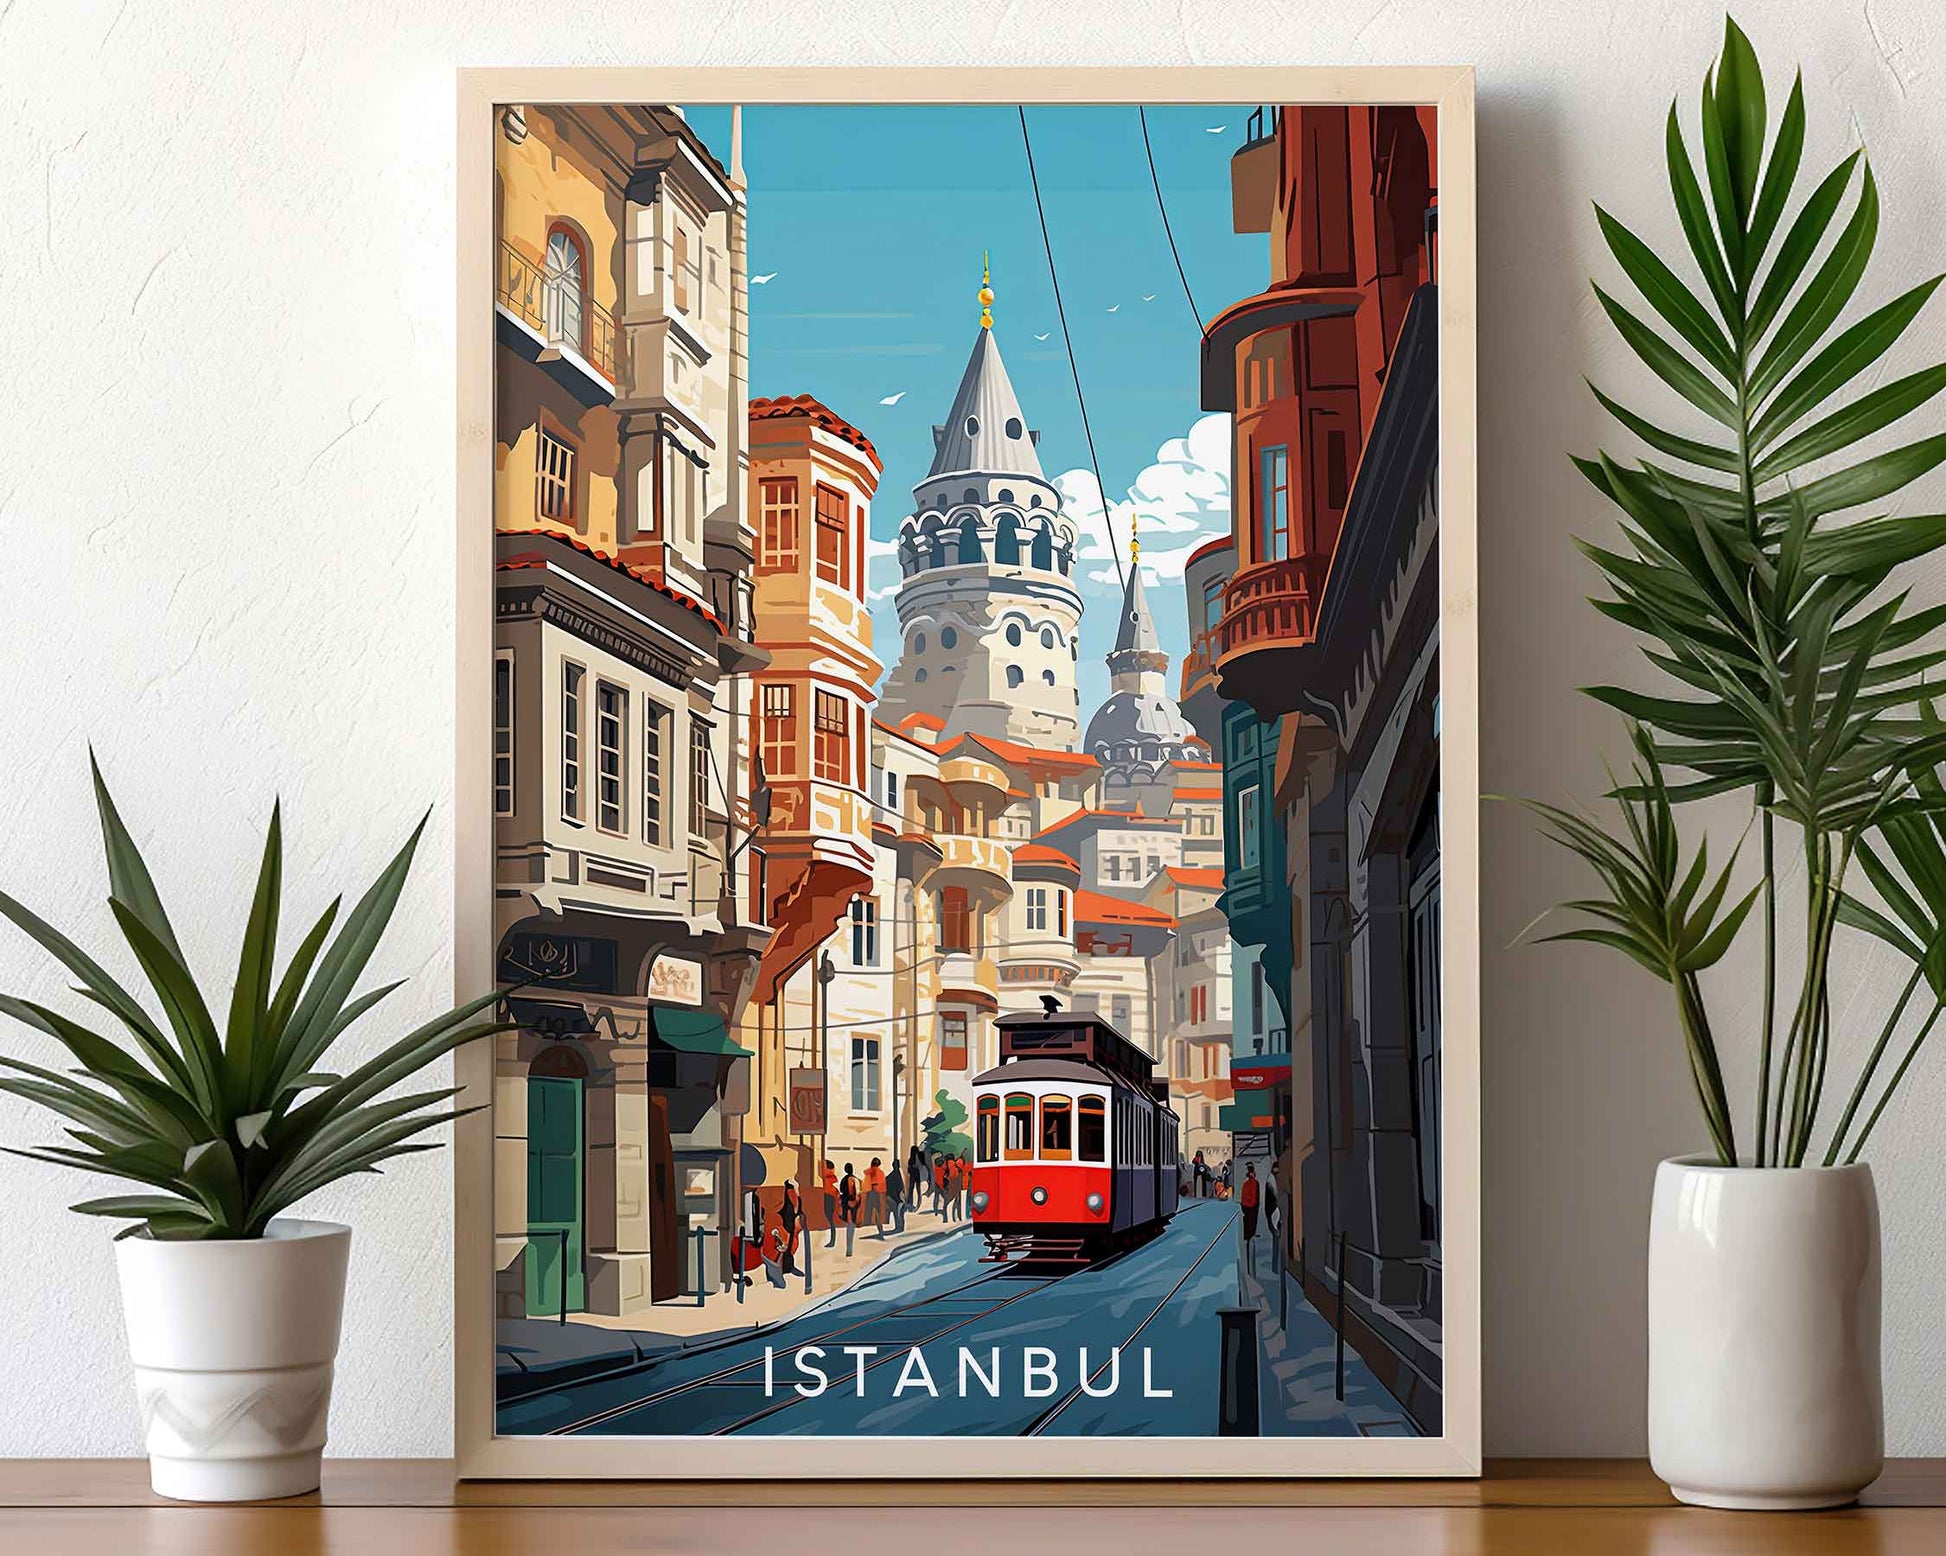 Framed Image of Istanbul Turkey Wall Art Print Travel Posters Illustration